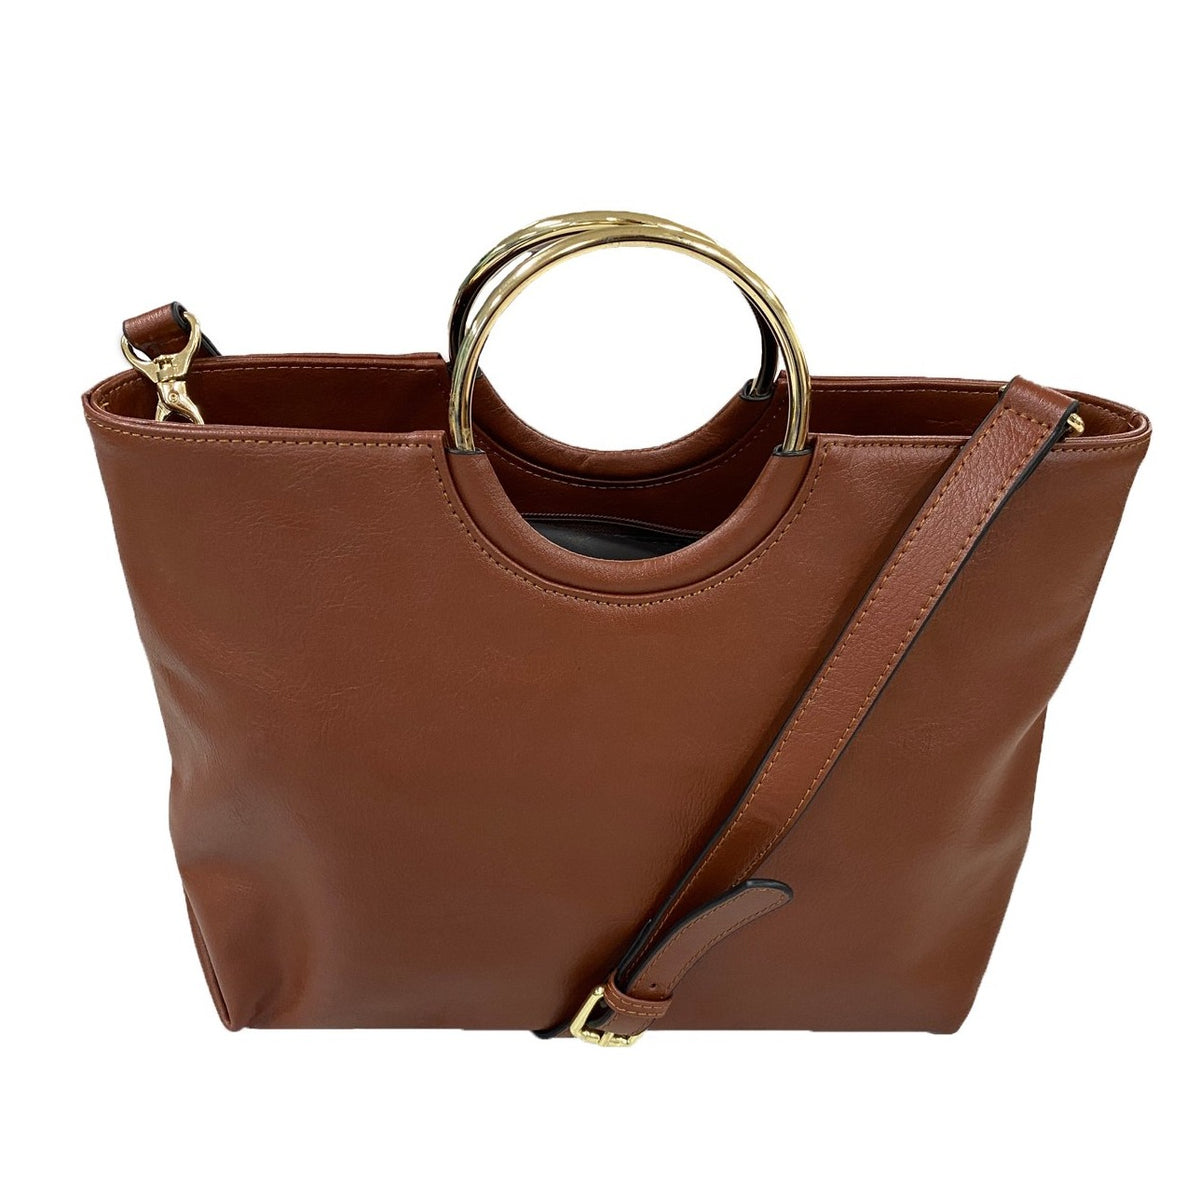 Women's Crossbody Bags, Genuine Leather, Canvas & More